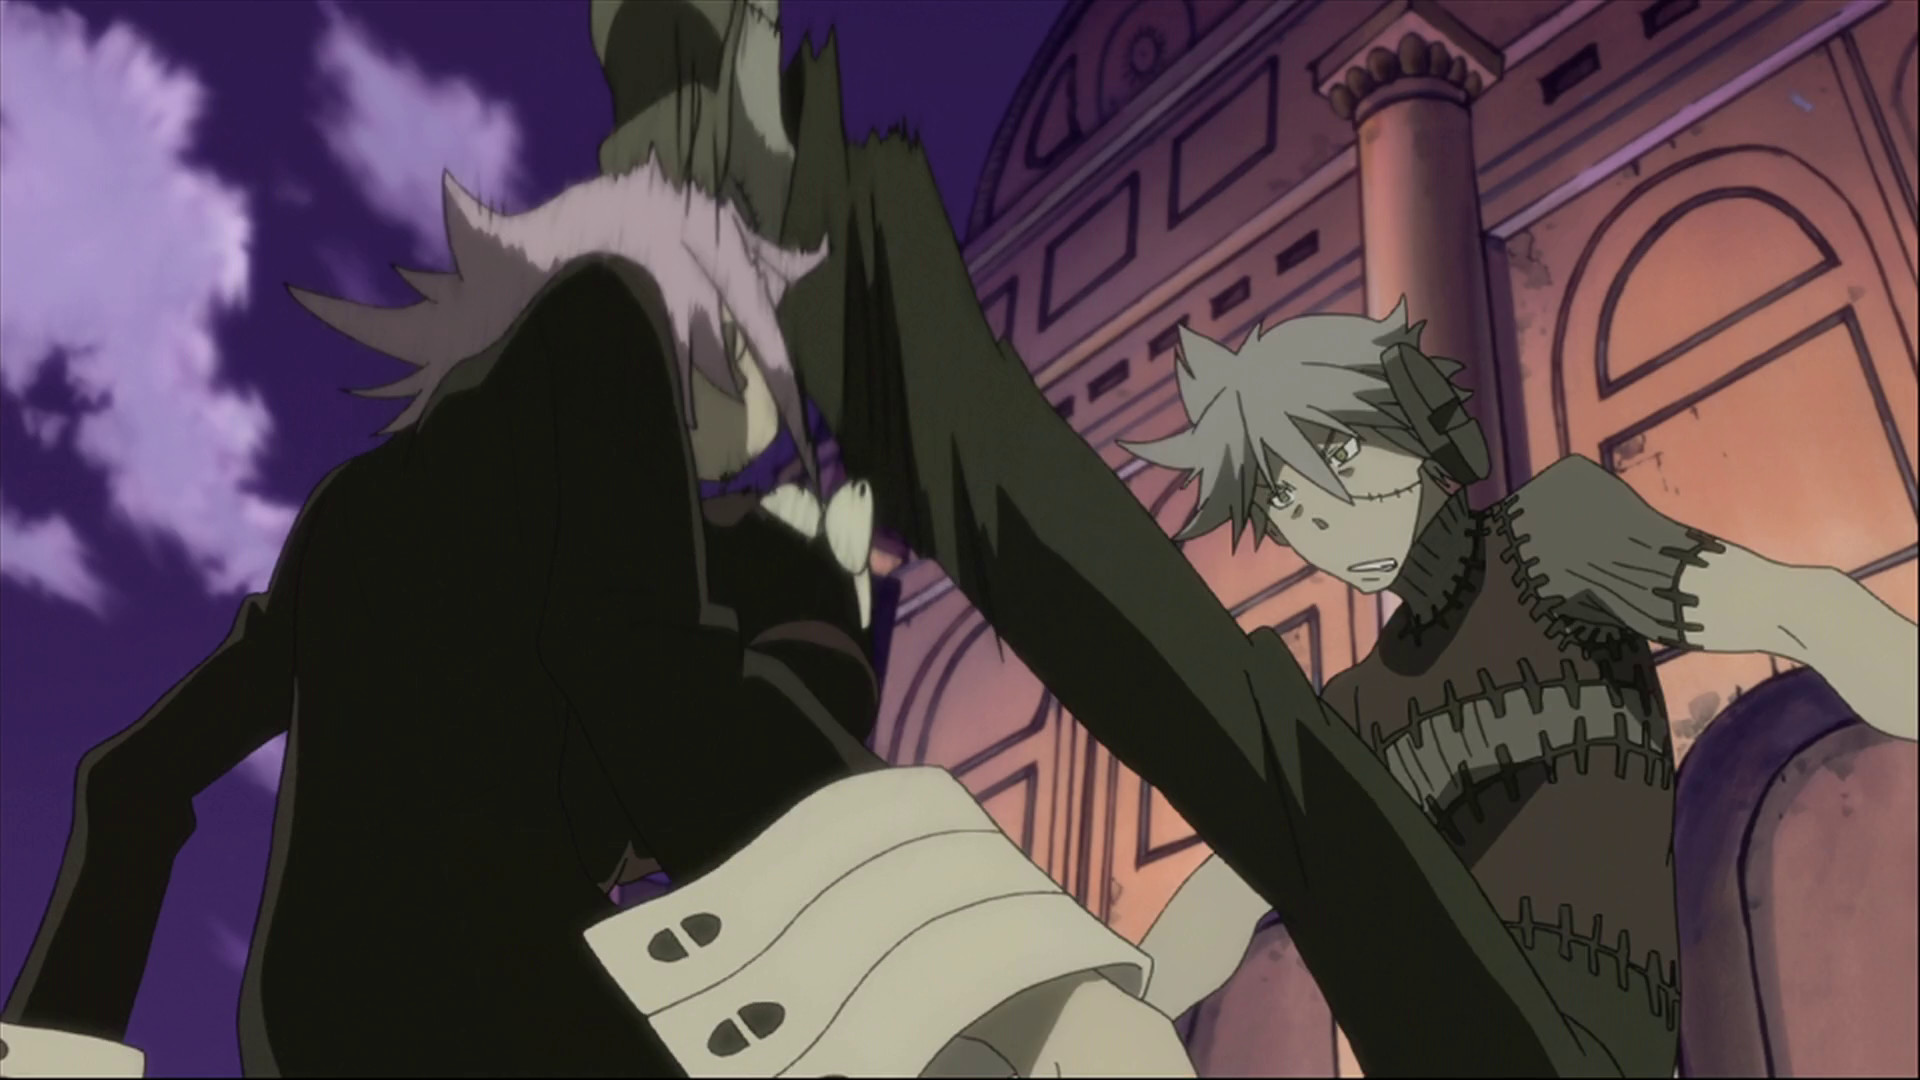 1920x1080 Image - Episode 8 - Stein coming down onto Crona with a kick.png | Soul  Eater Wiki | FANDOM powered by Wikia